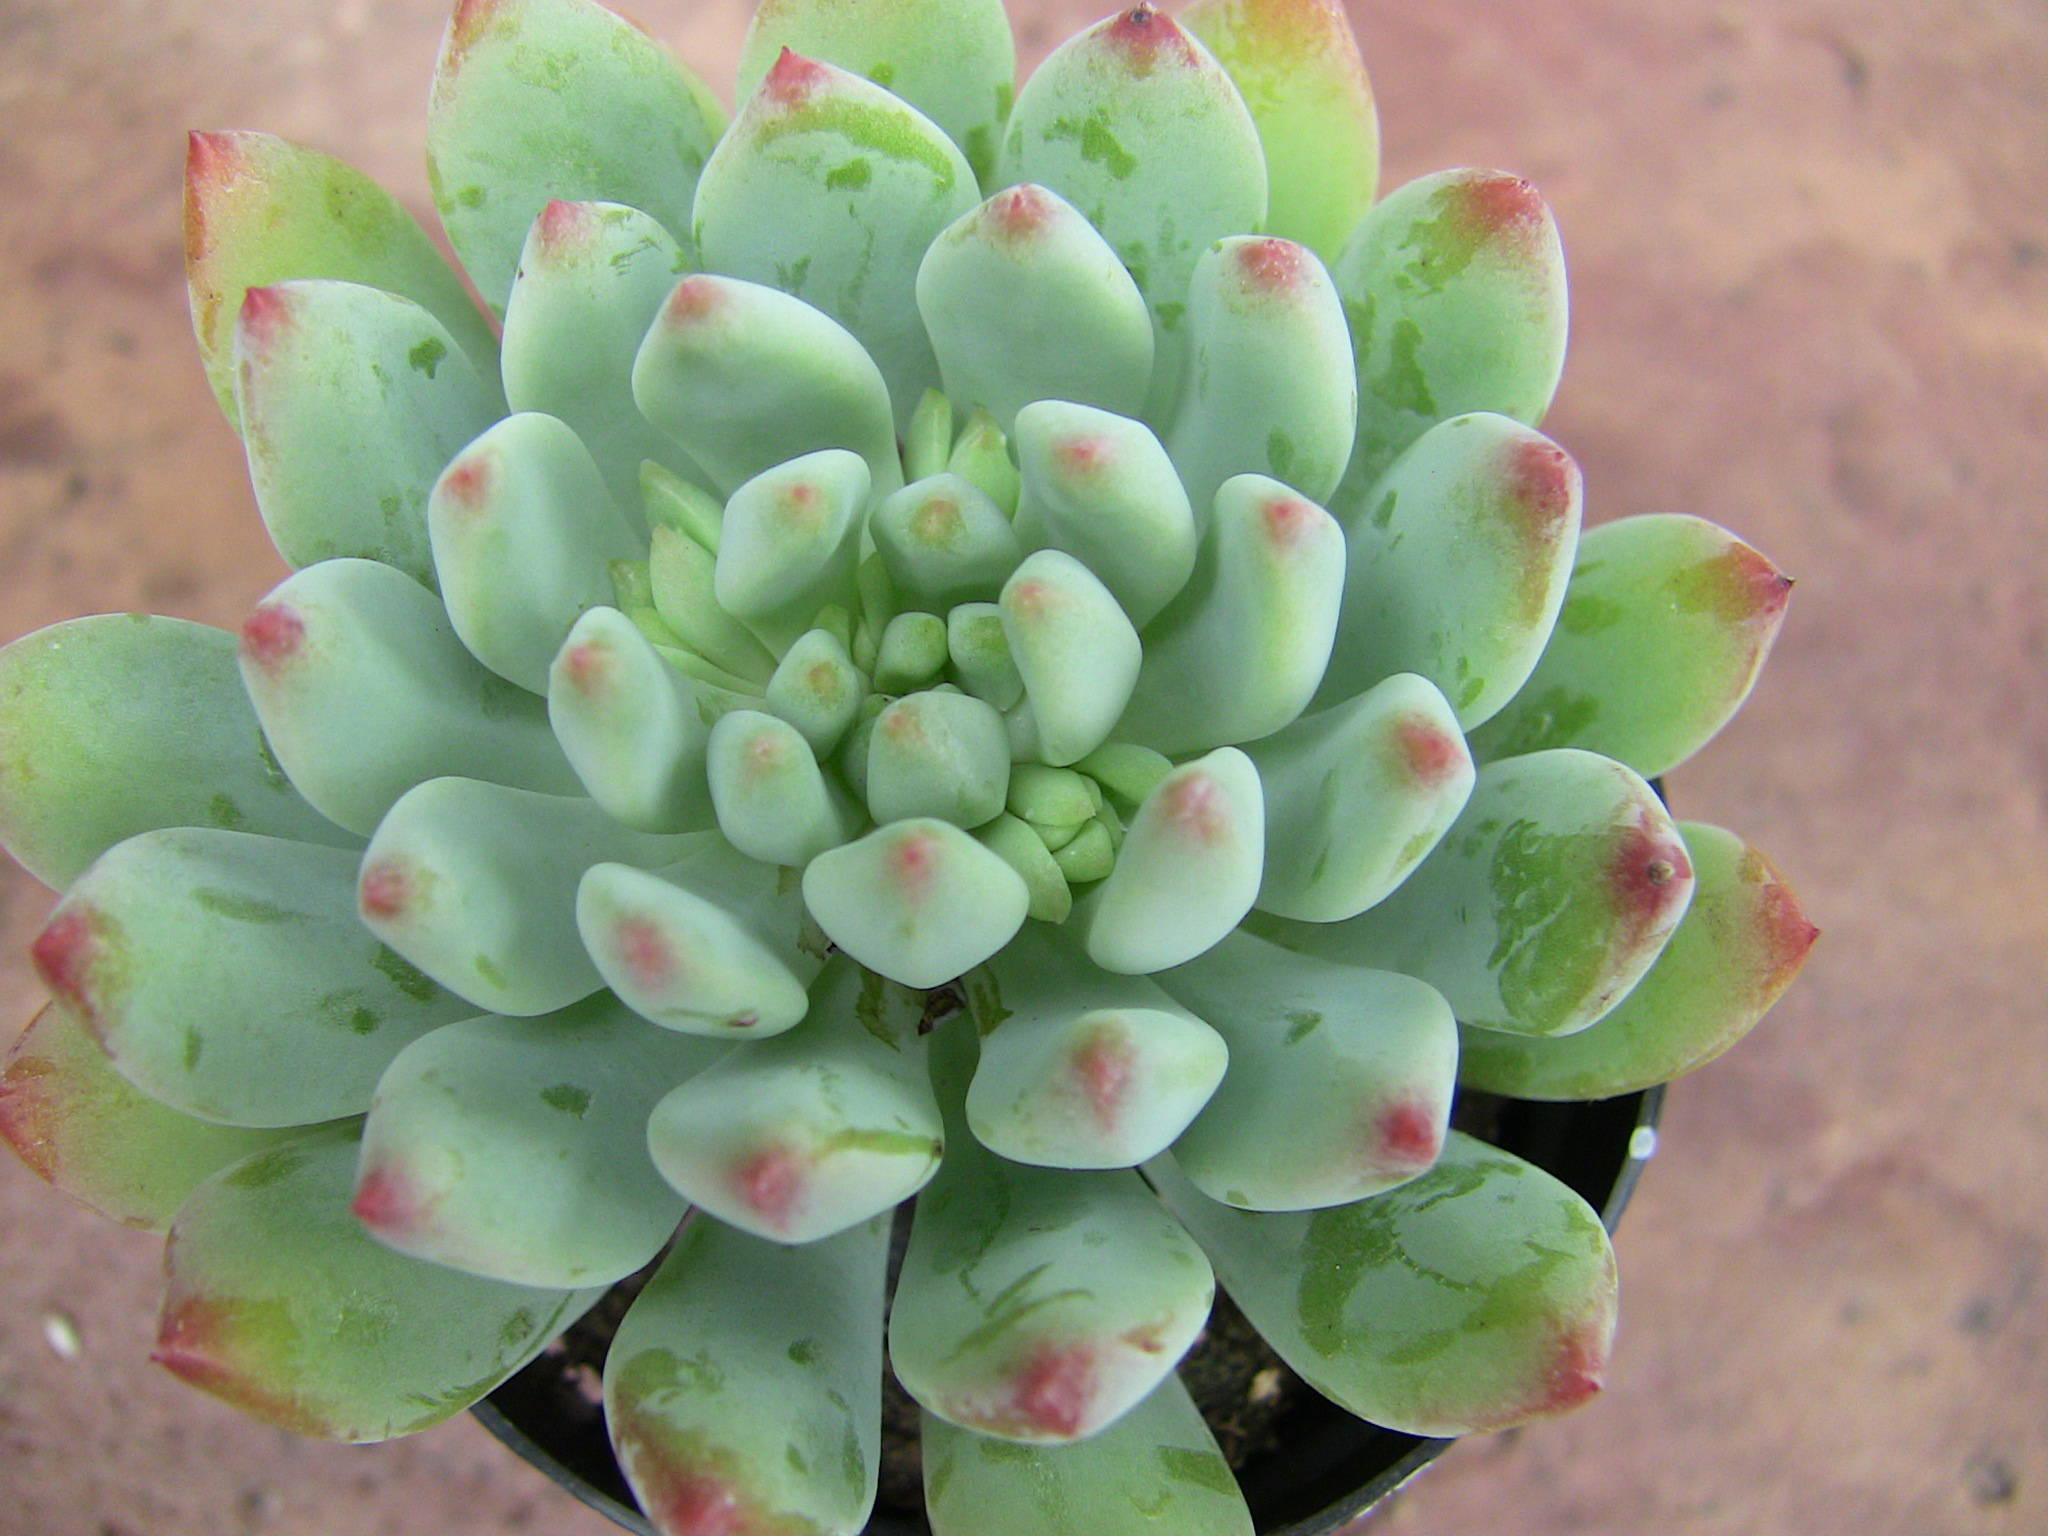 Succulent Types of the Month Club Subscription